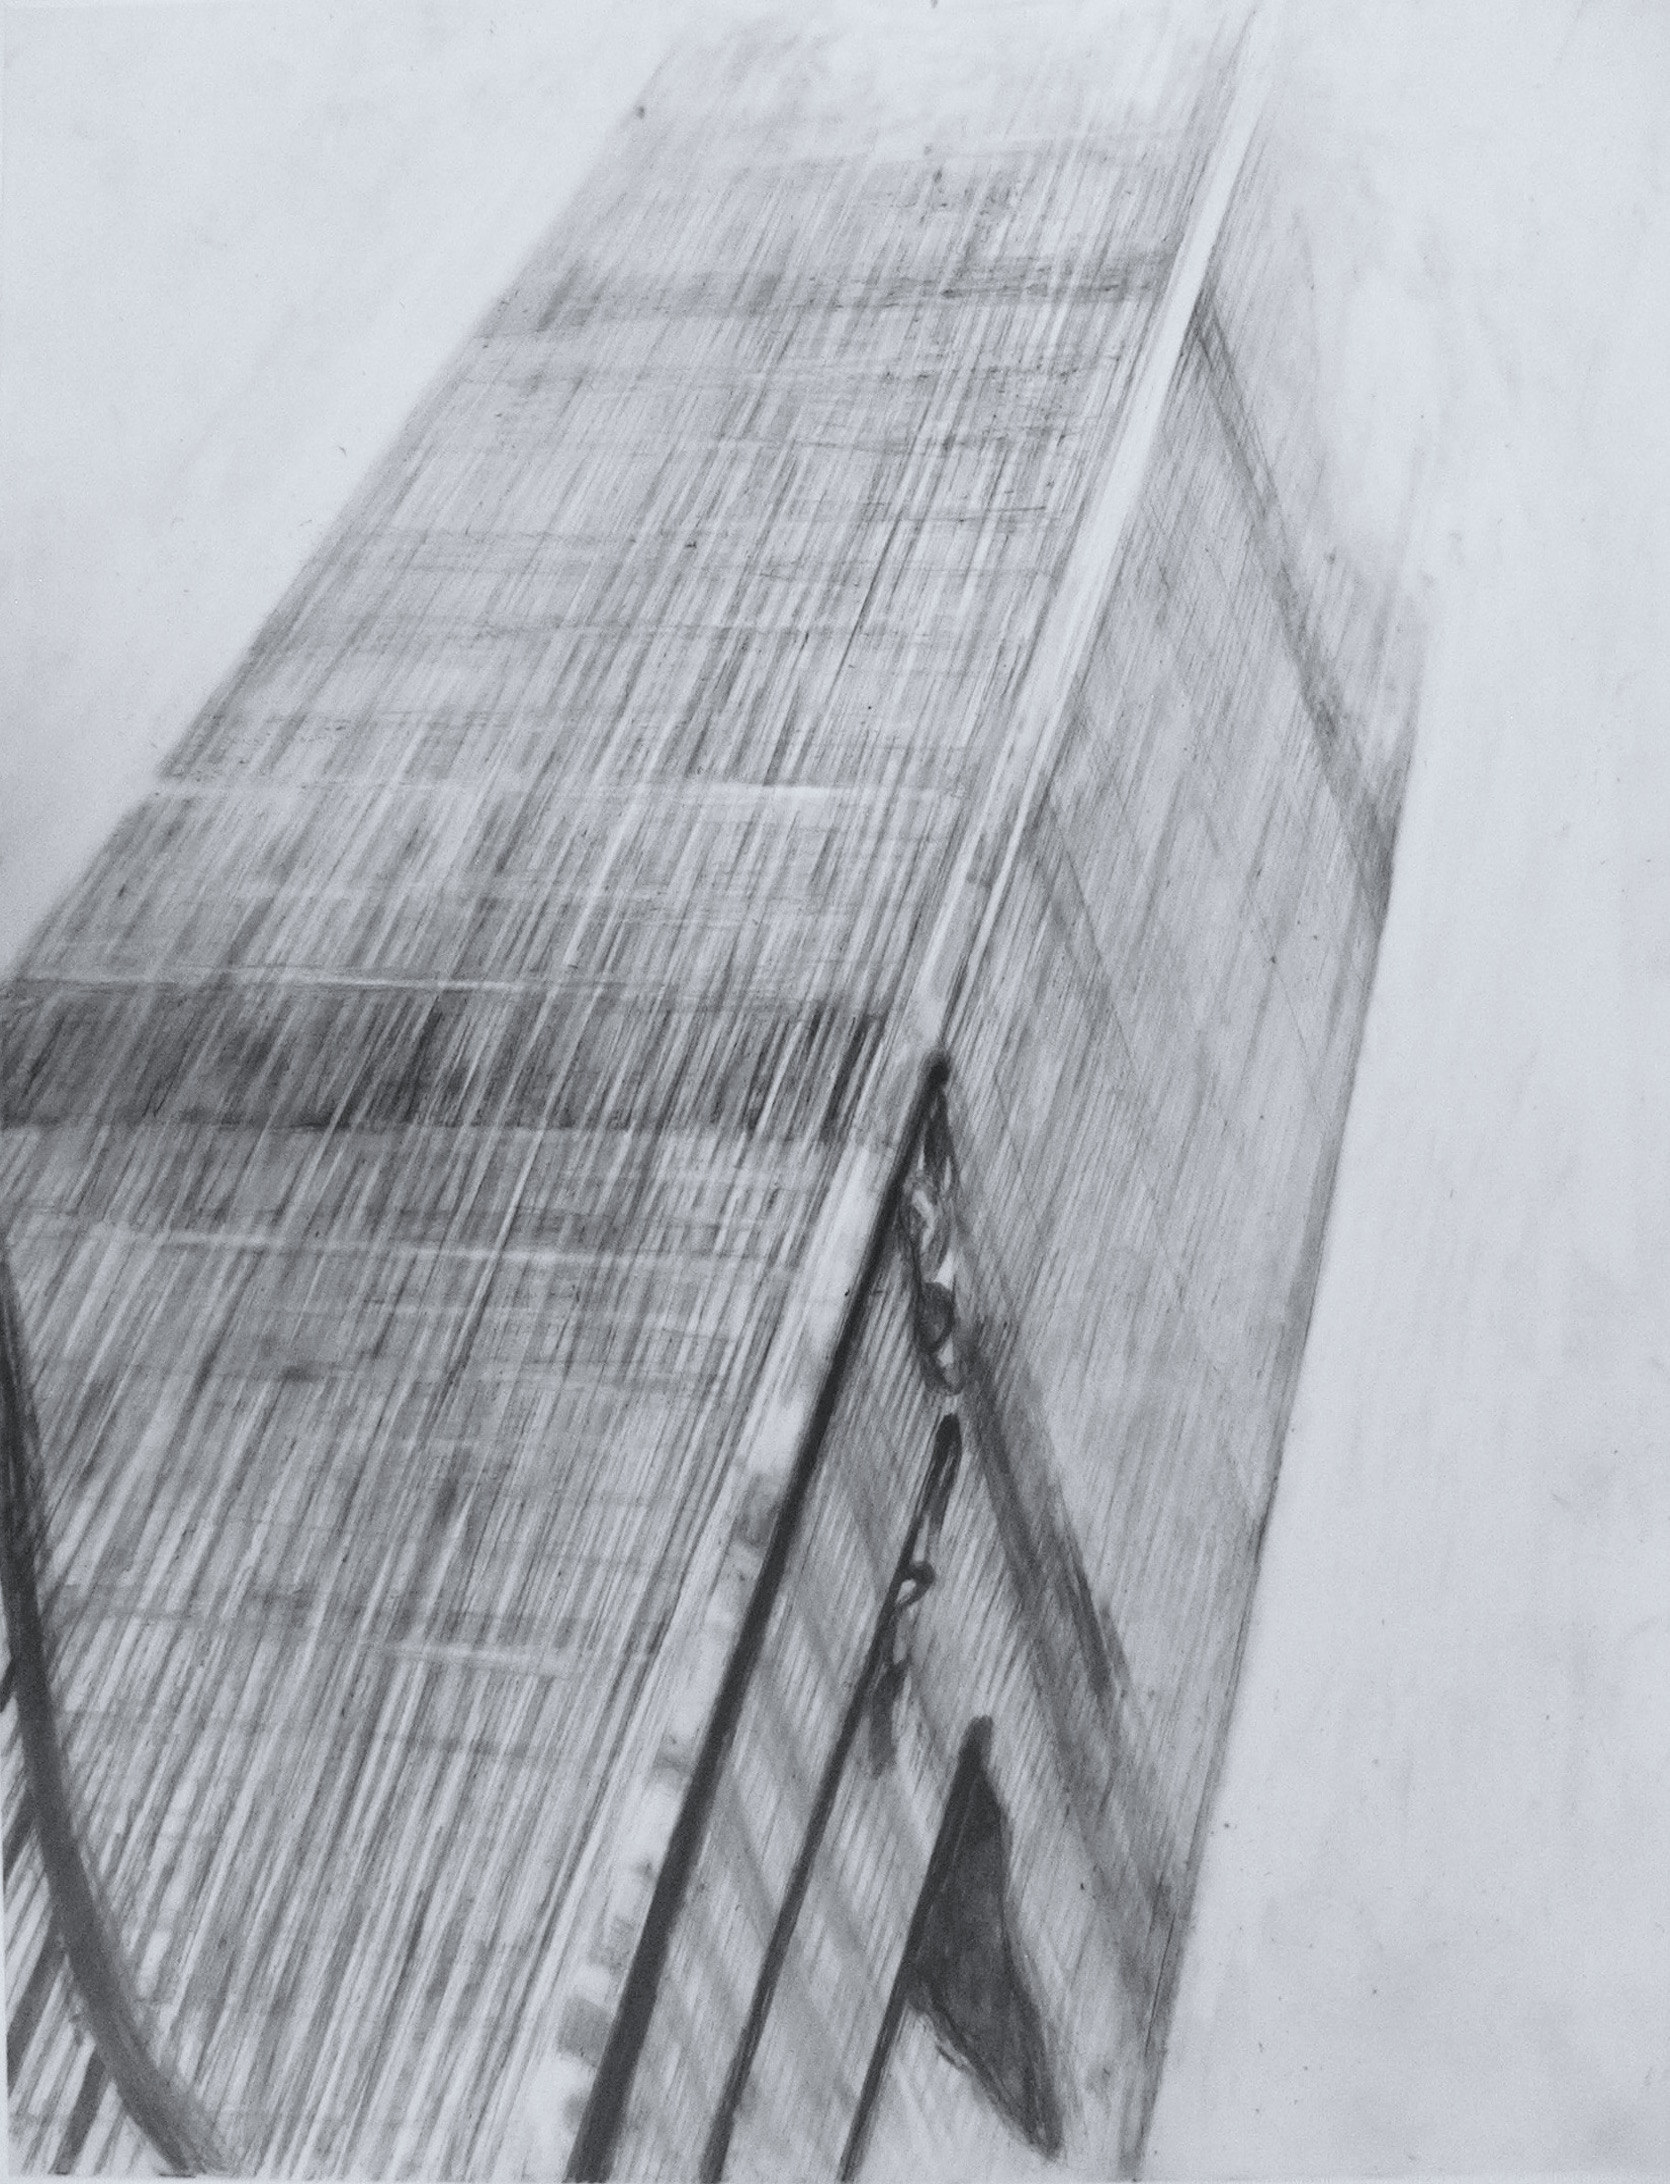 Drawing from the bottom looking up at one of the twin towers with flags in front